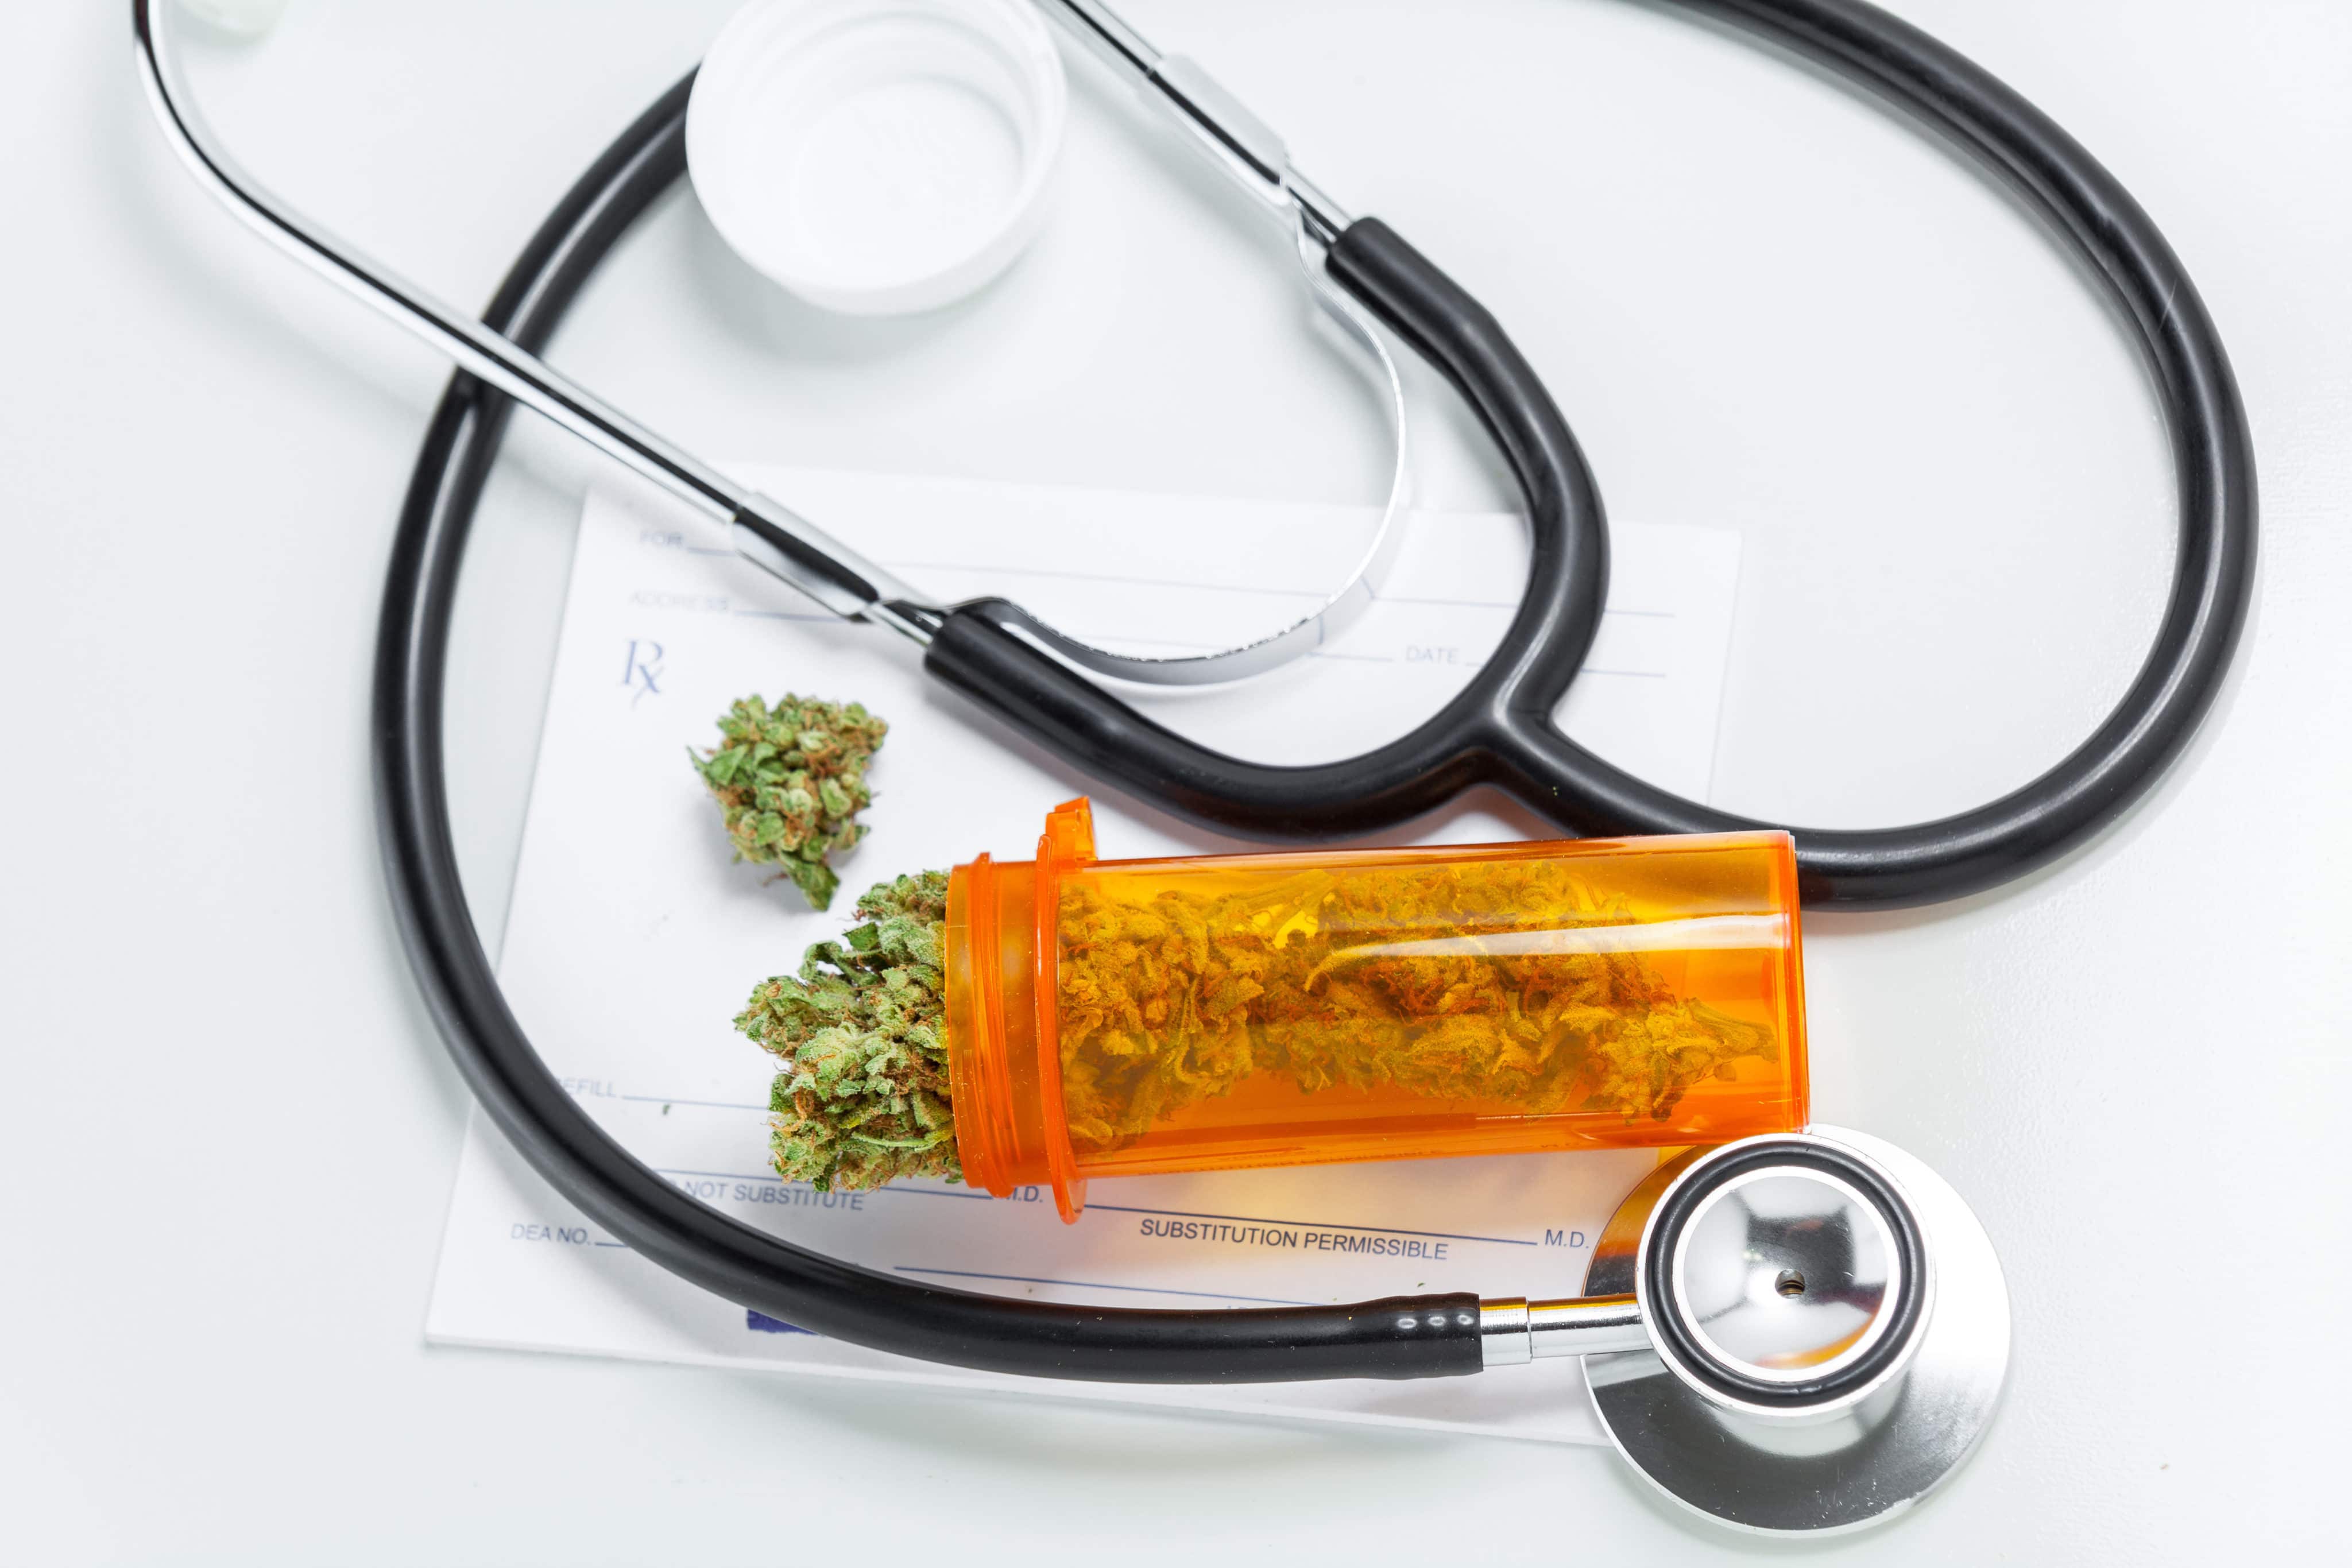 Missouri Lawmakers OK Plan to Open Up Medical Cannabis Records